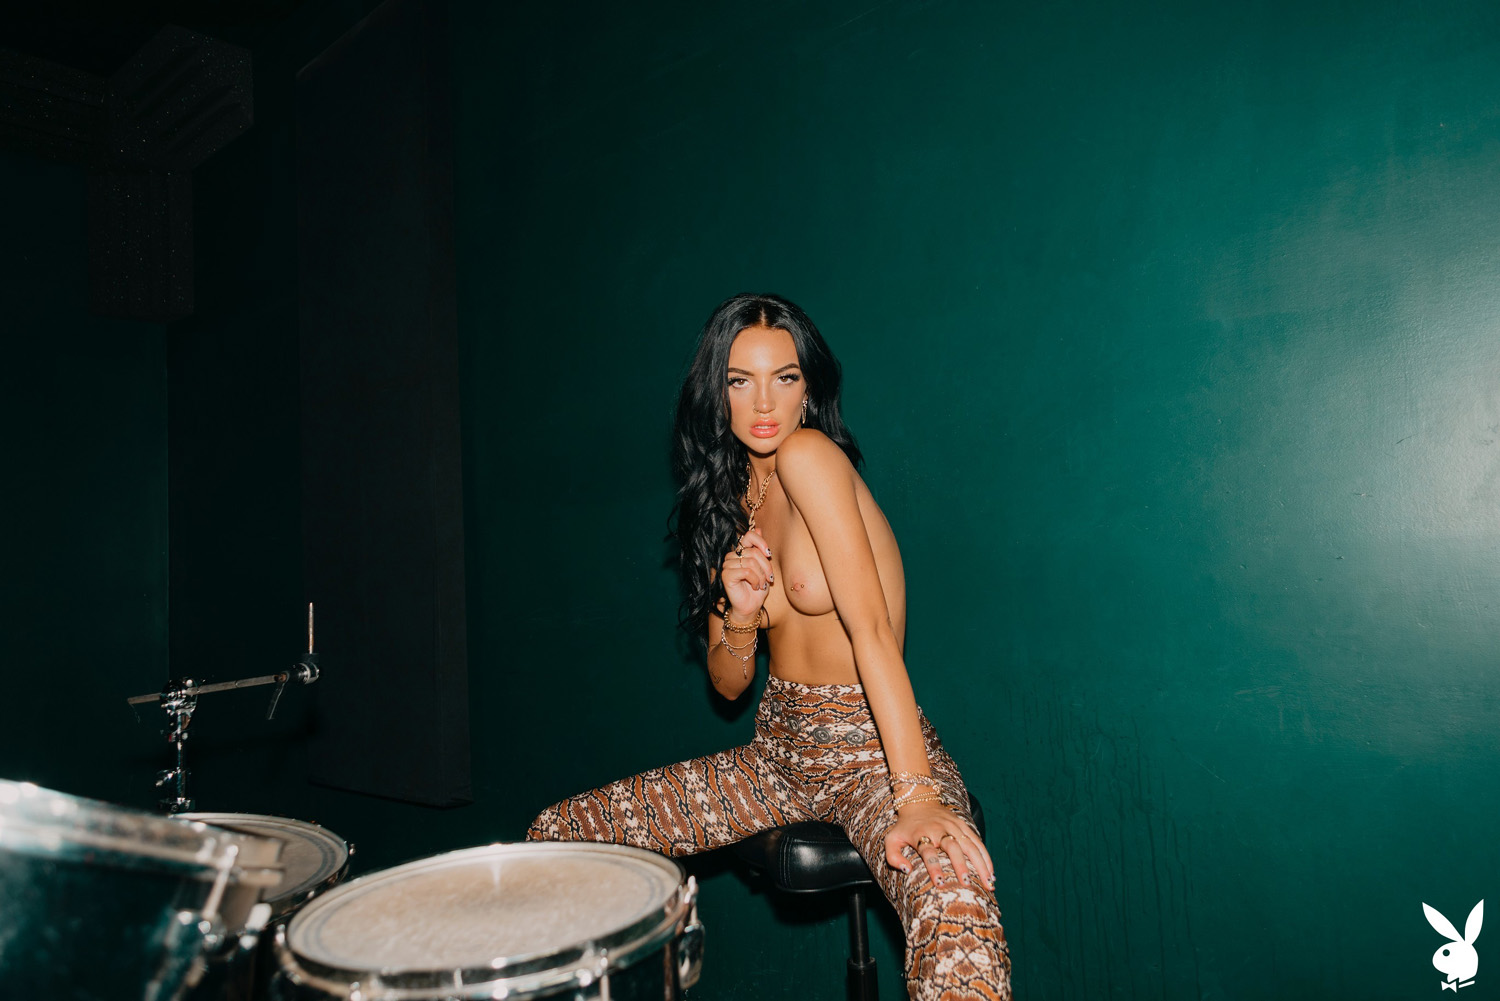 Ashlyn Chere strips backstage at the rock concert's after party